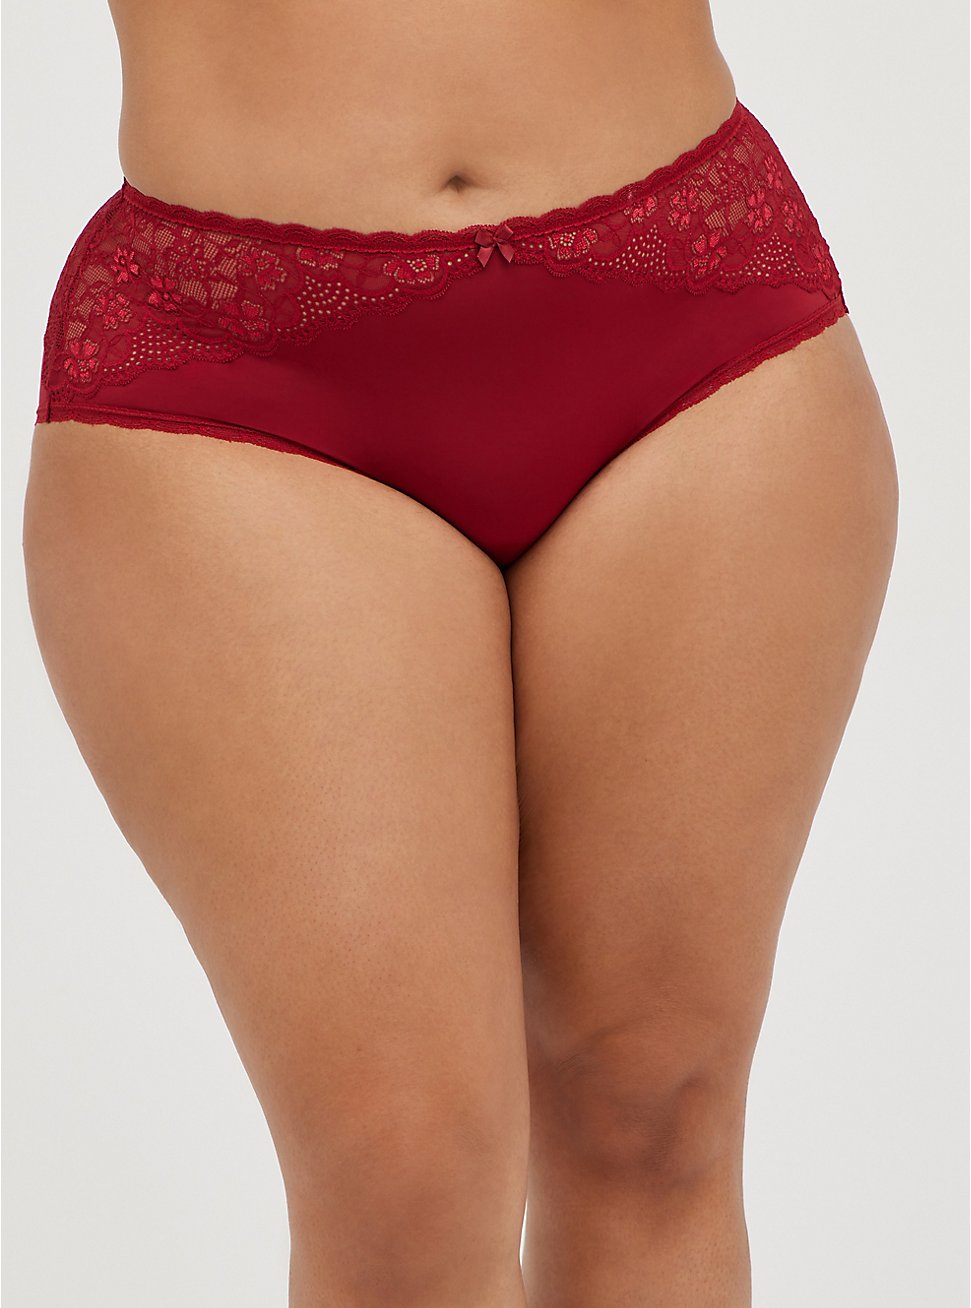 Plus Size Cheeky Panty - Lace & Microfiber Red , BIKING RED, hi-res